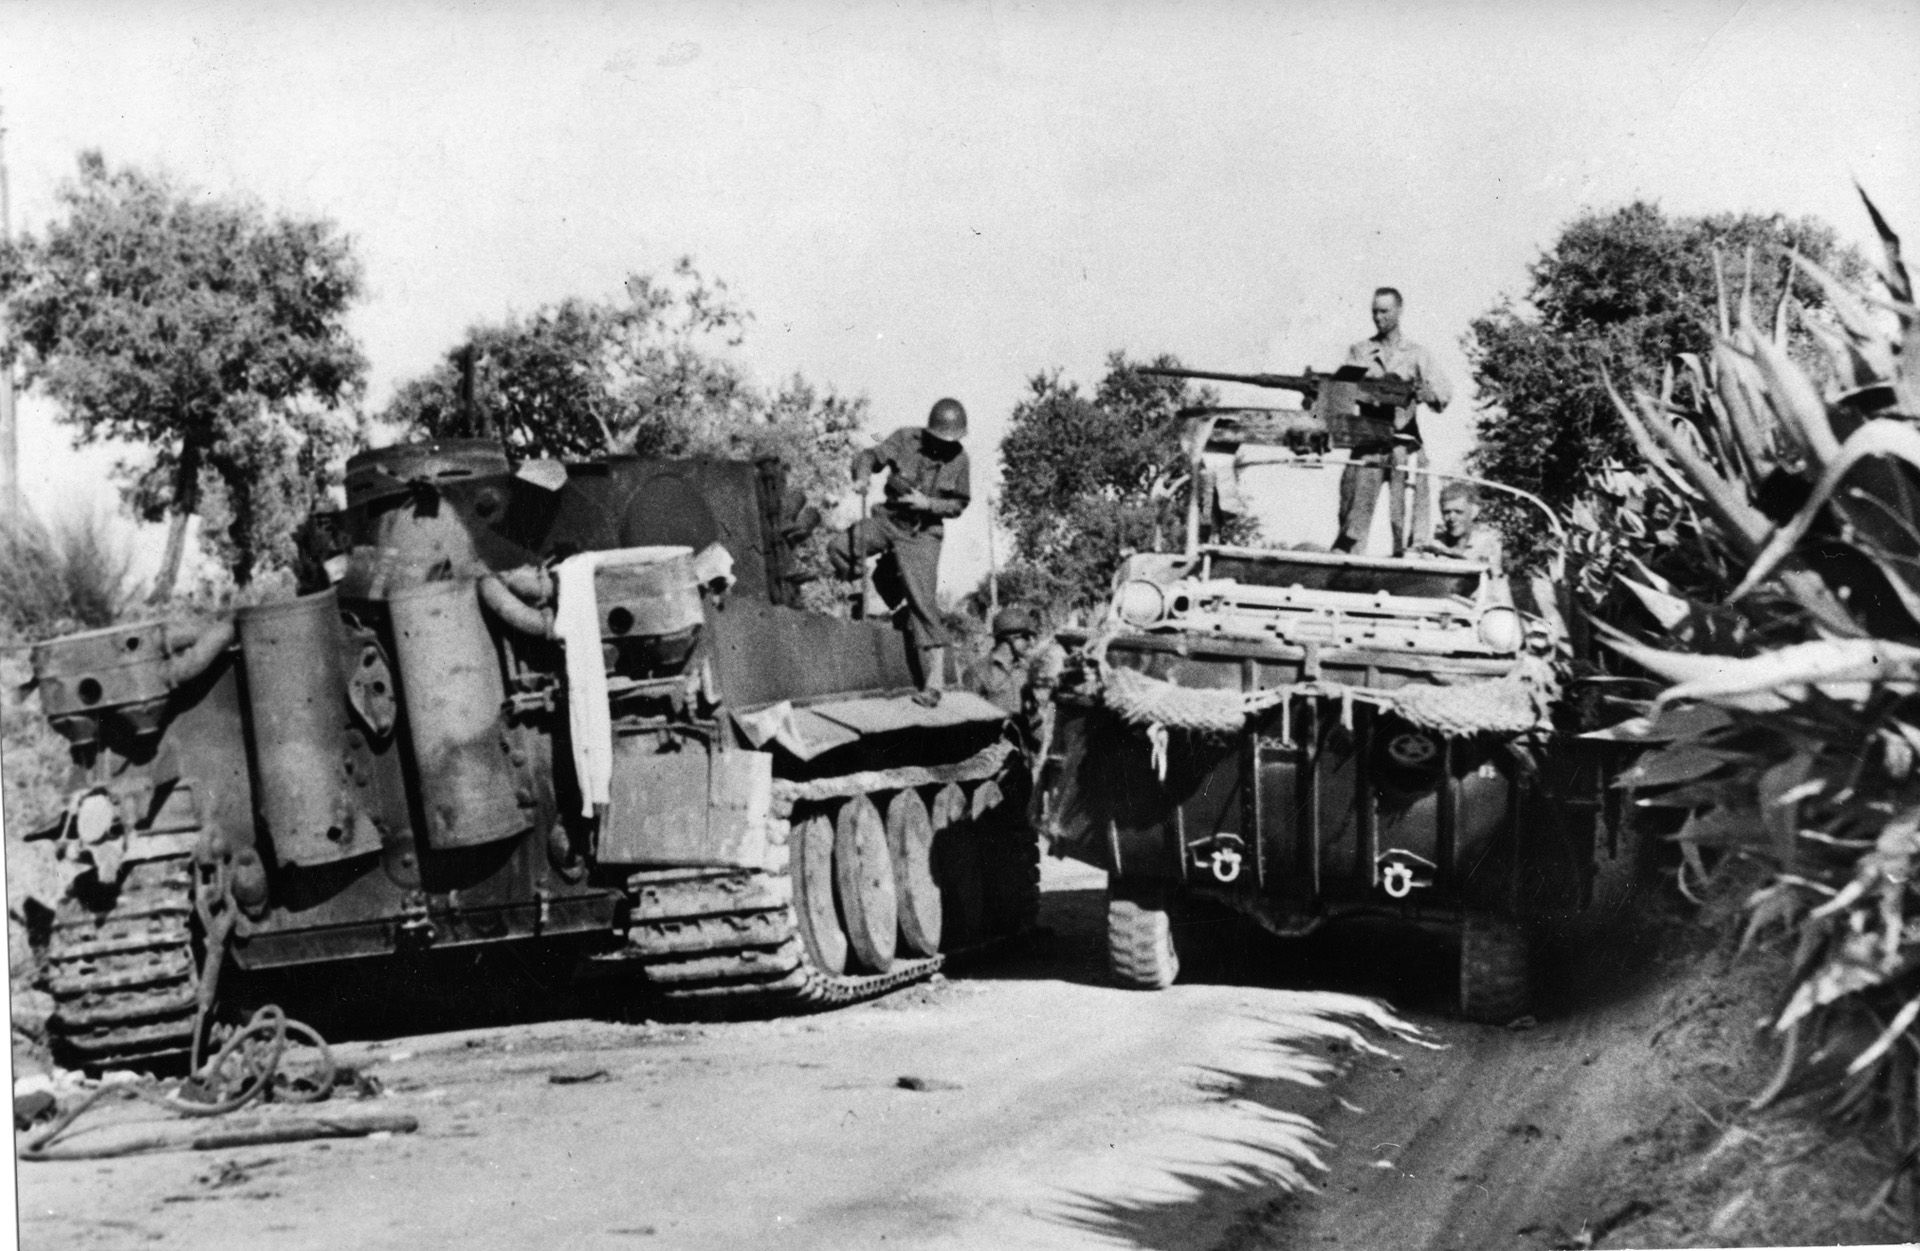 An American DUKW (amphibious vehicle) squeezes past a disabled German Tiger tank that blocks the road to Sicily’s northern coast.